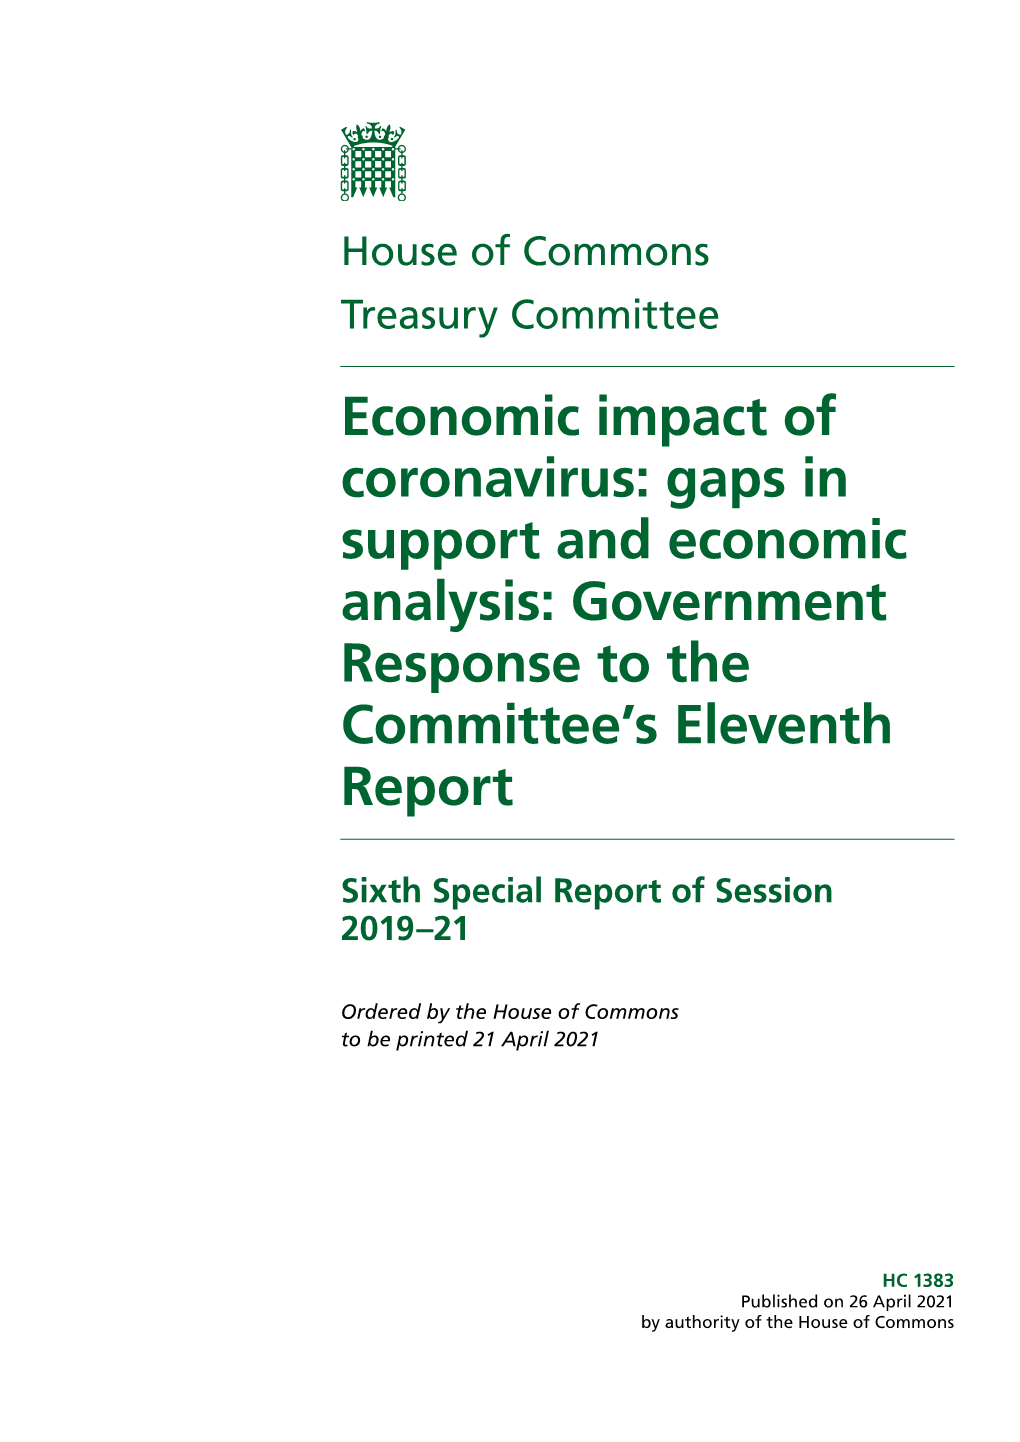 Economic Impact of Coronavirus: Gaps in Support and Economic Analysis: Government Response to the Committee’S Eleventh Report